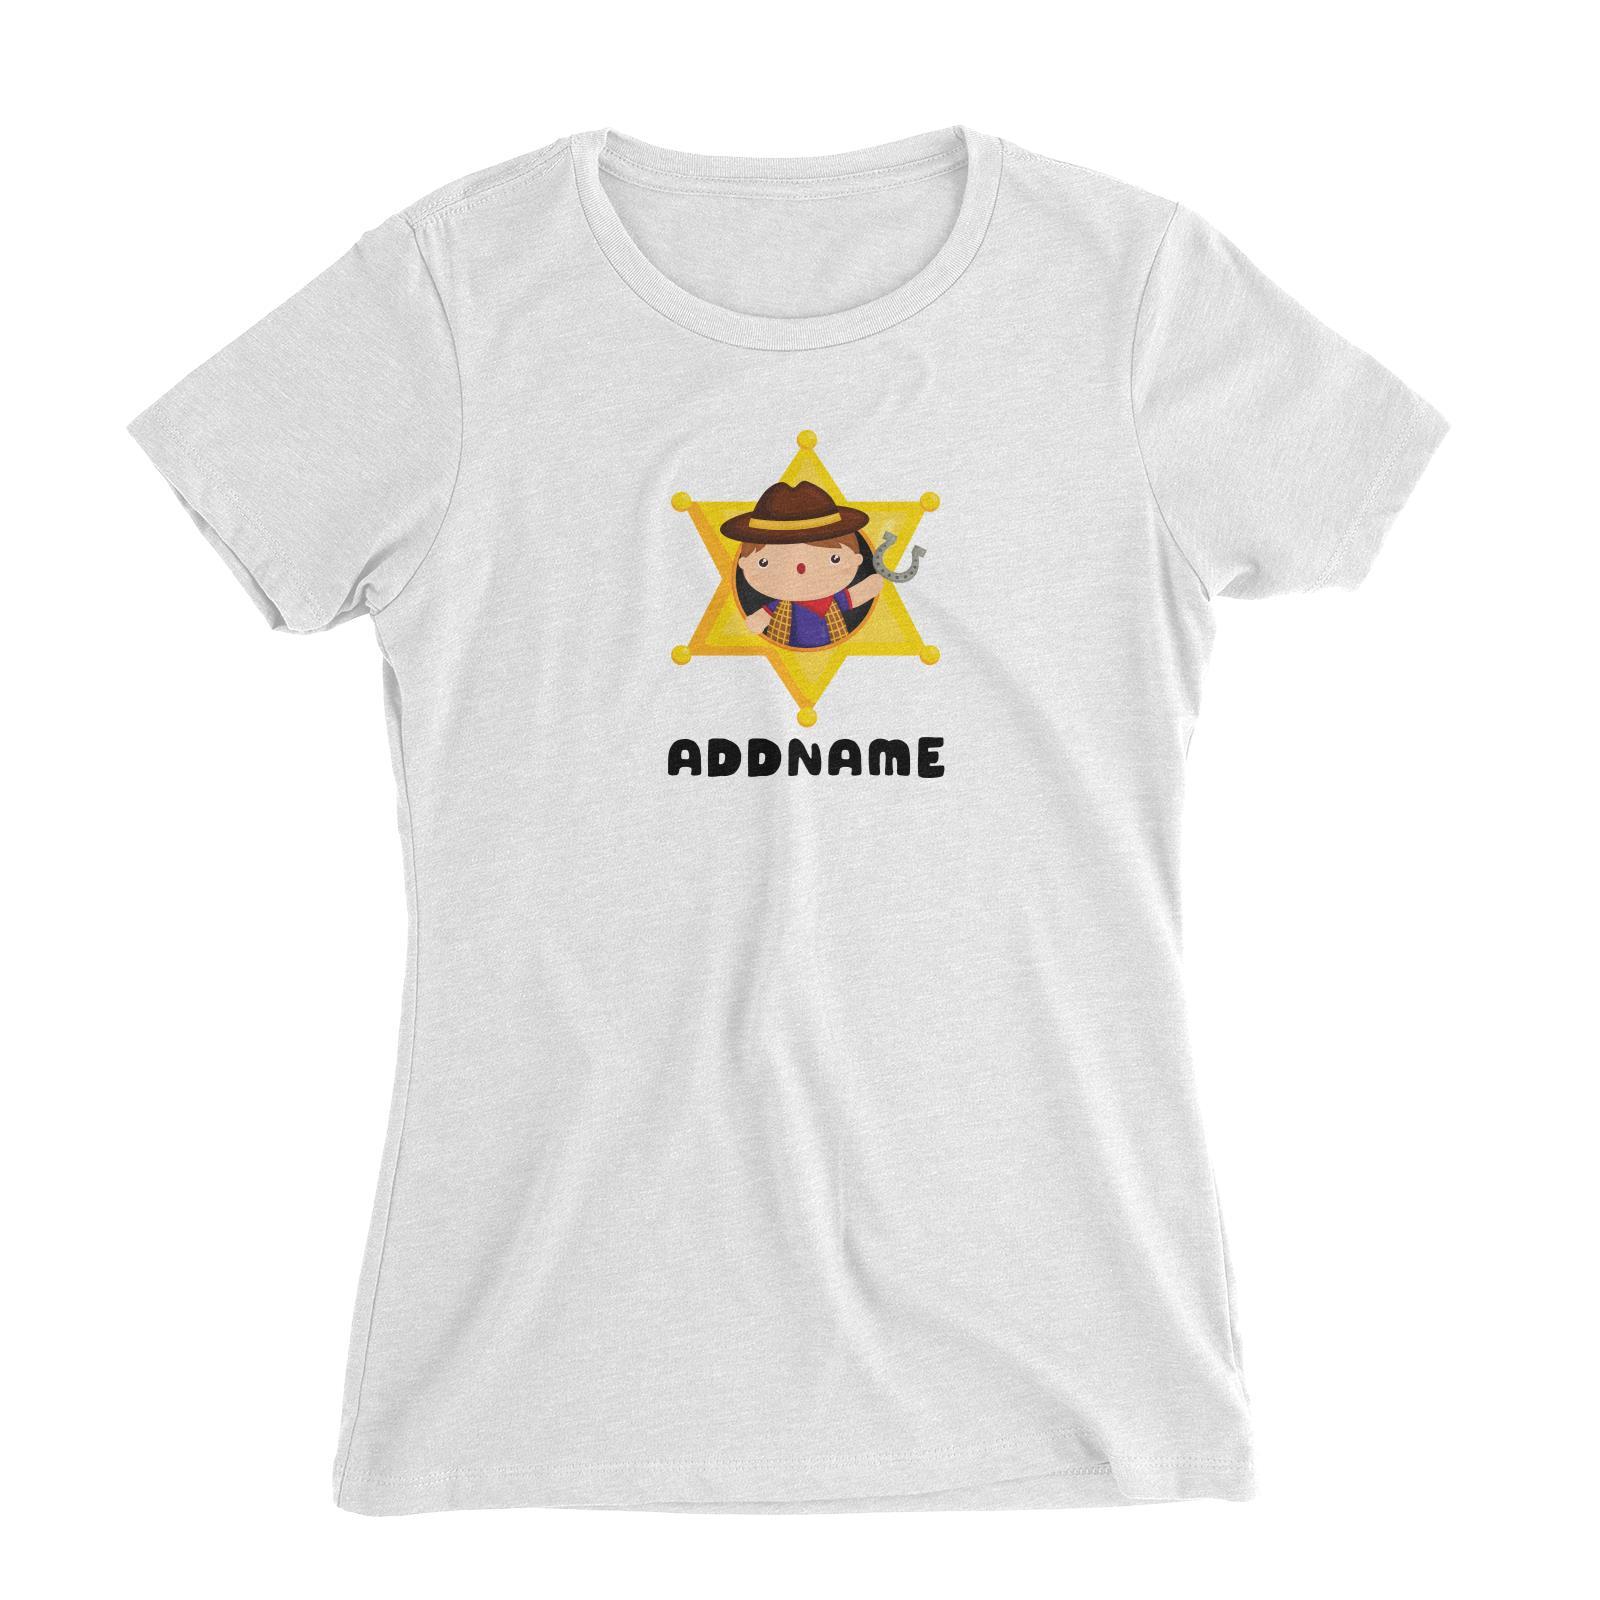 Birthday Cowboy Style Little Cowboy Holding Hoe In Star Badge Addname Women's Slim Fit T-Shirt